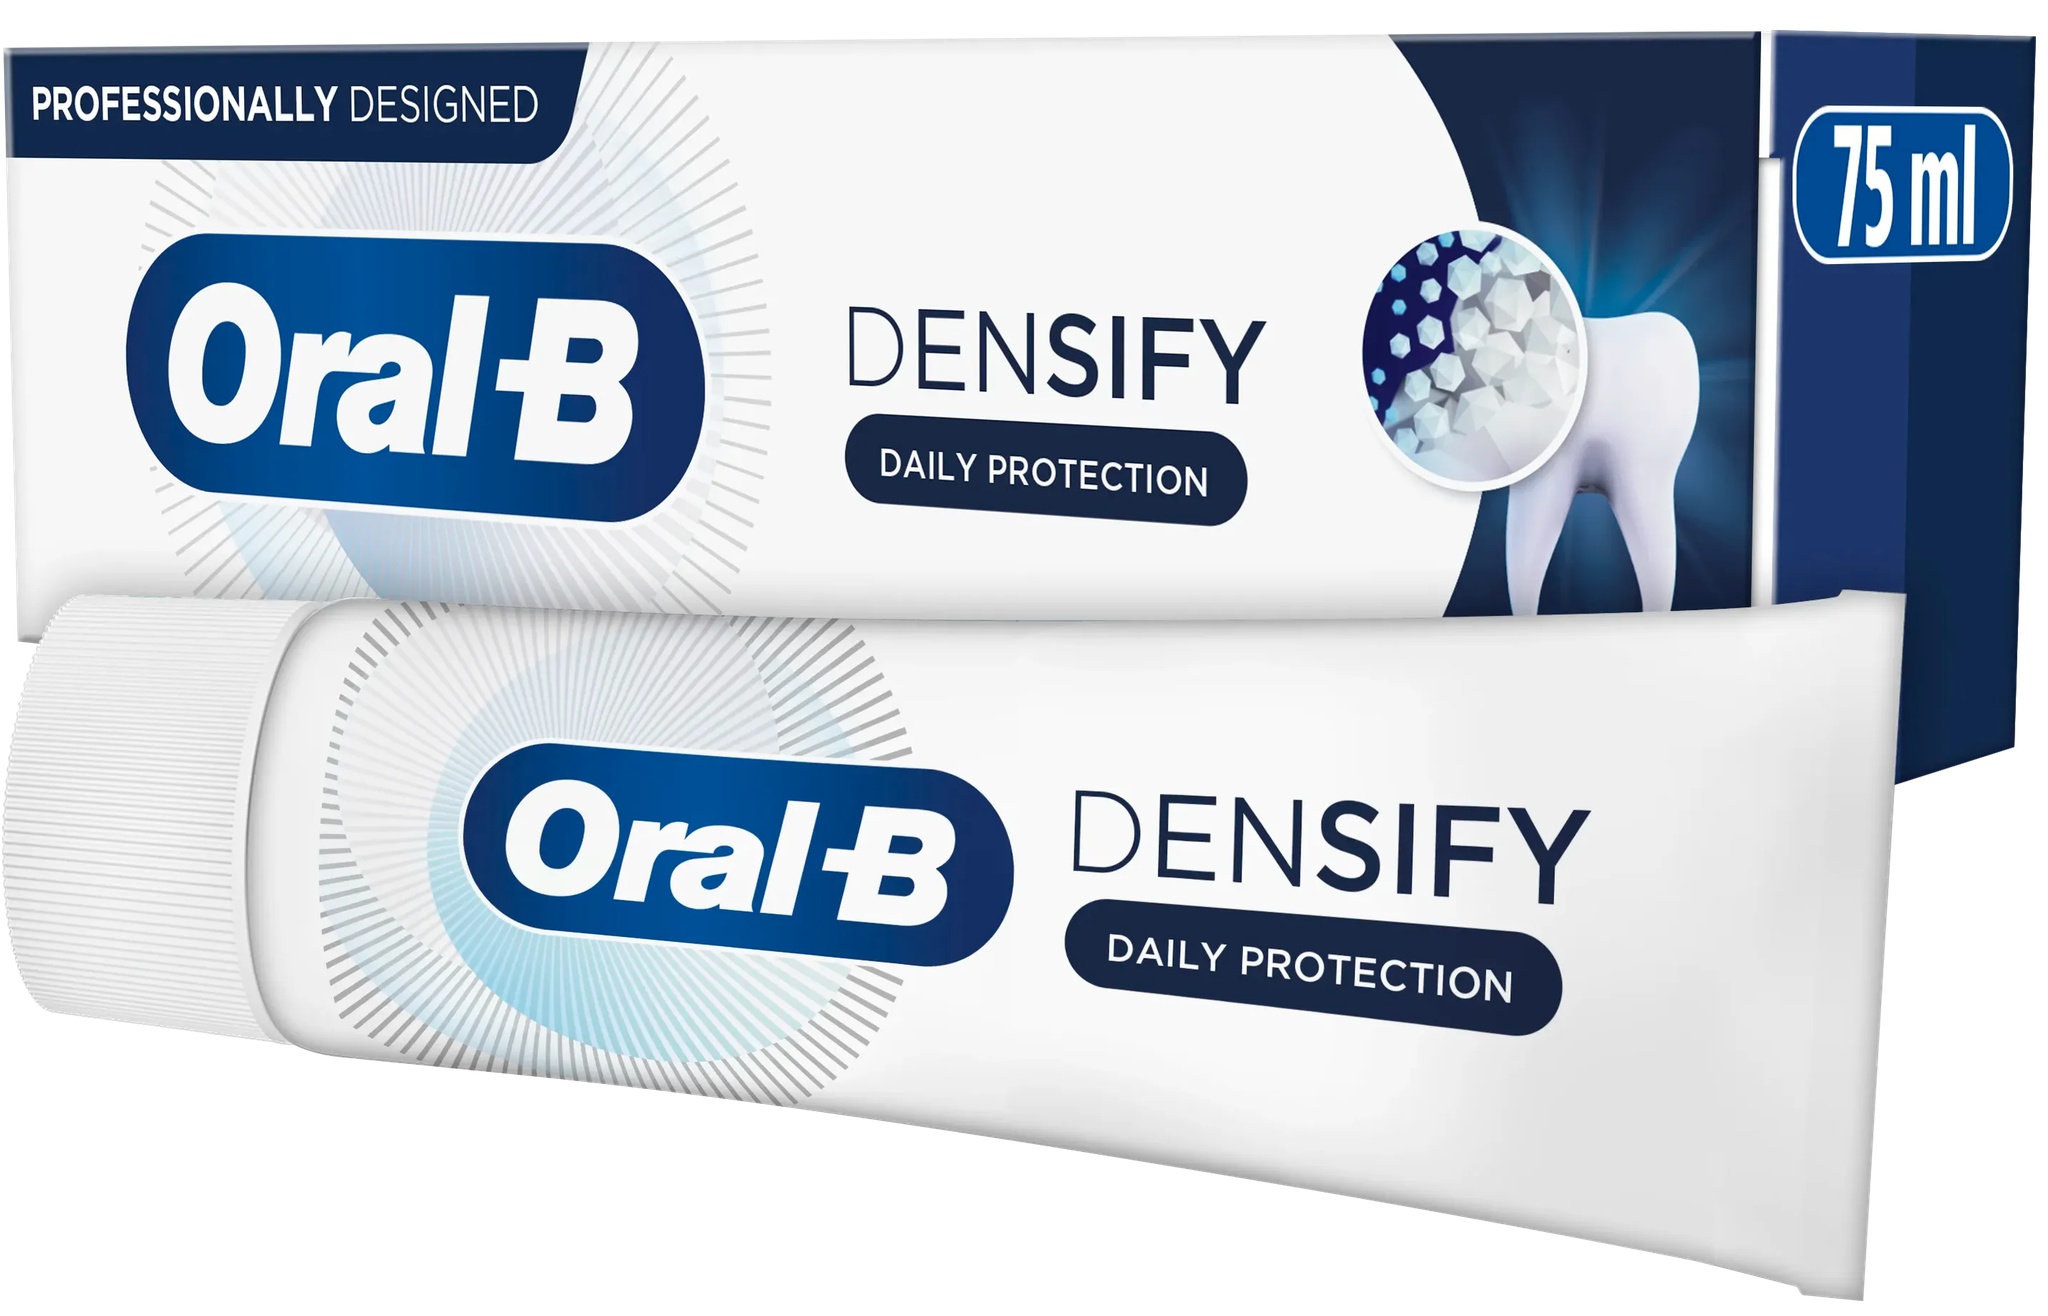 Oral-b Densify Daily Protection Toothpaste